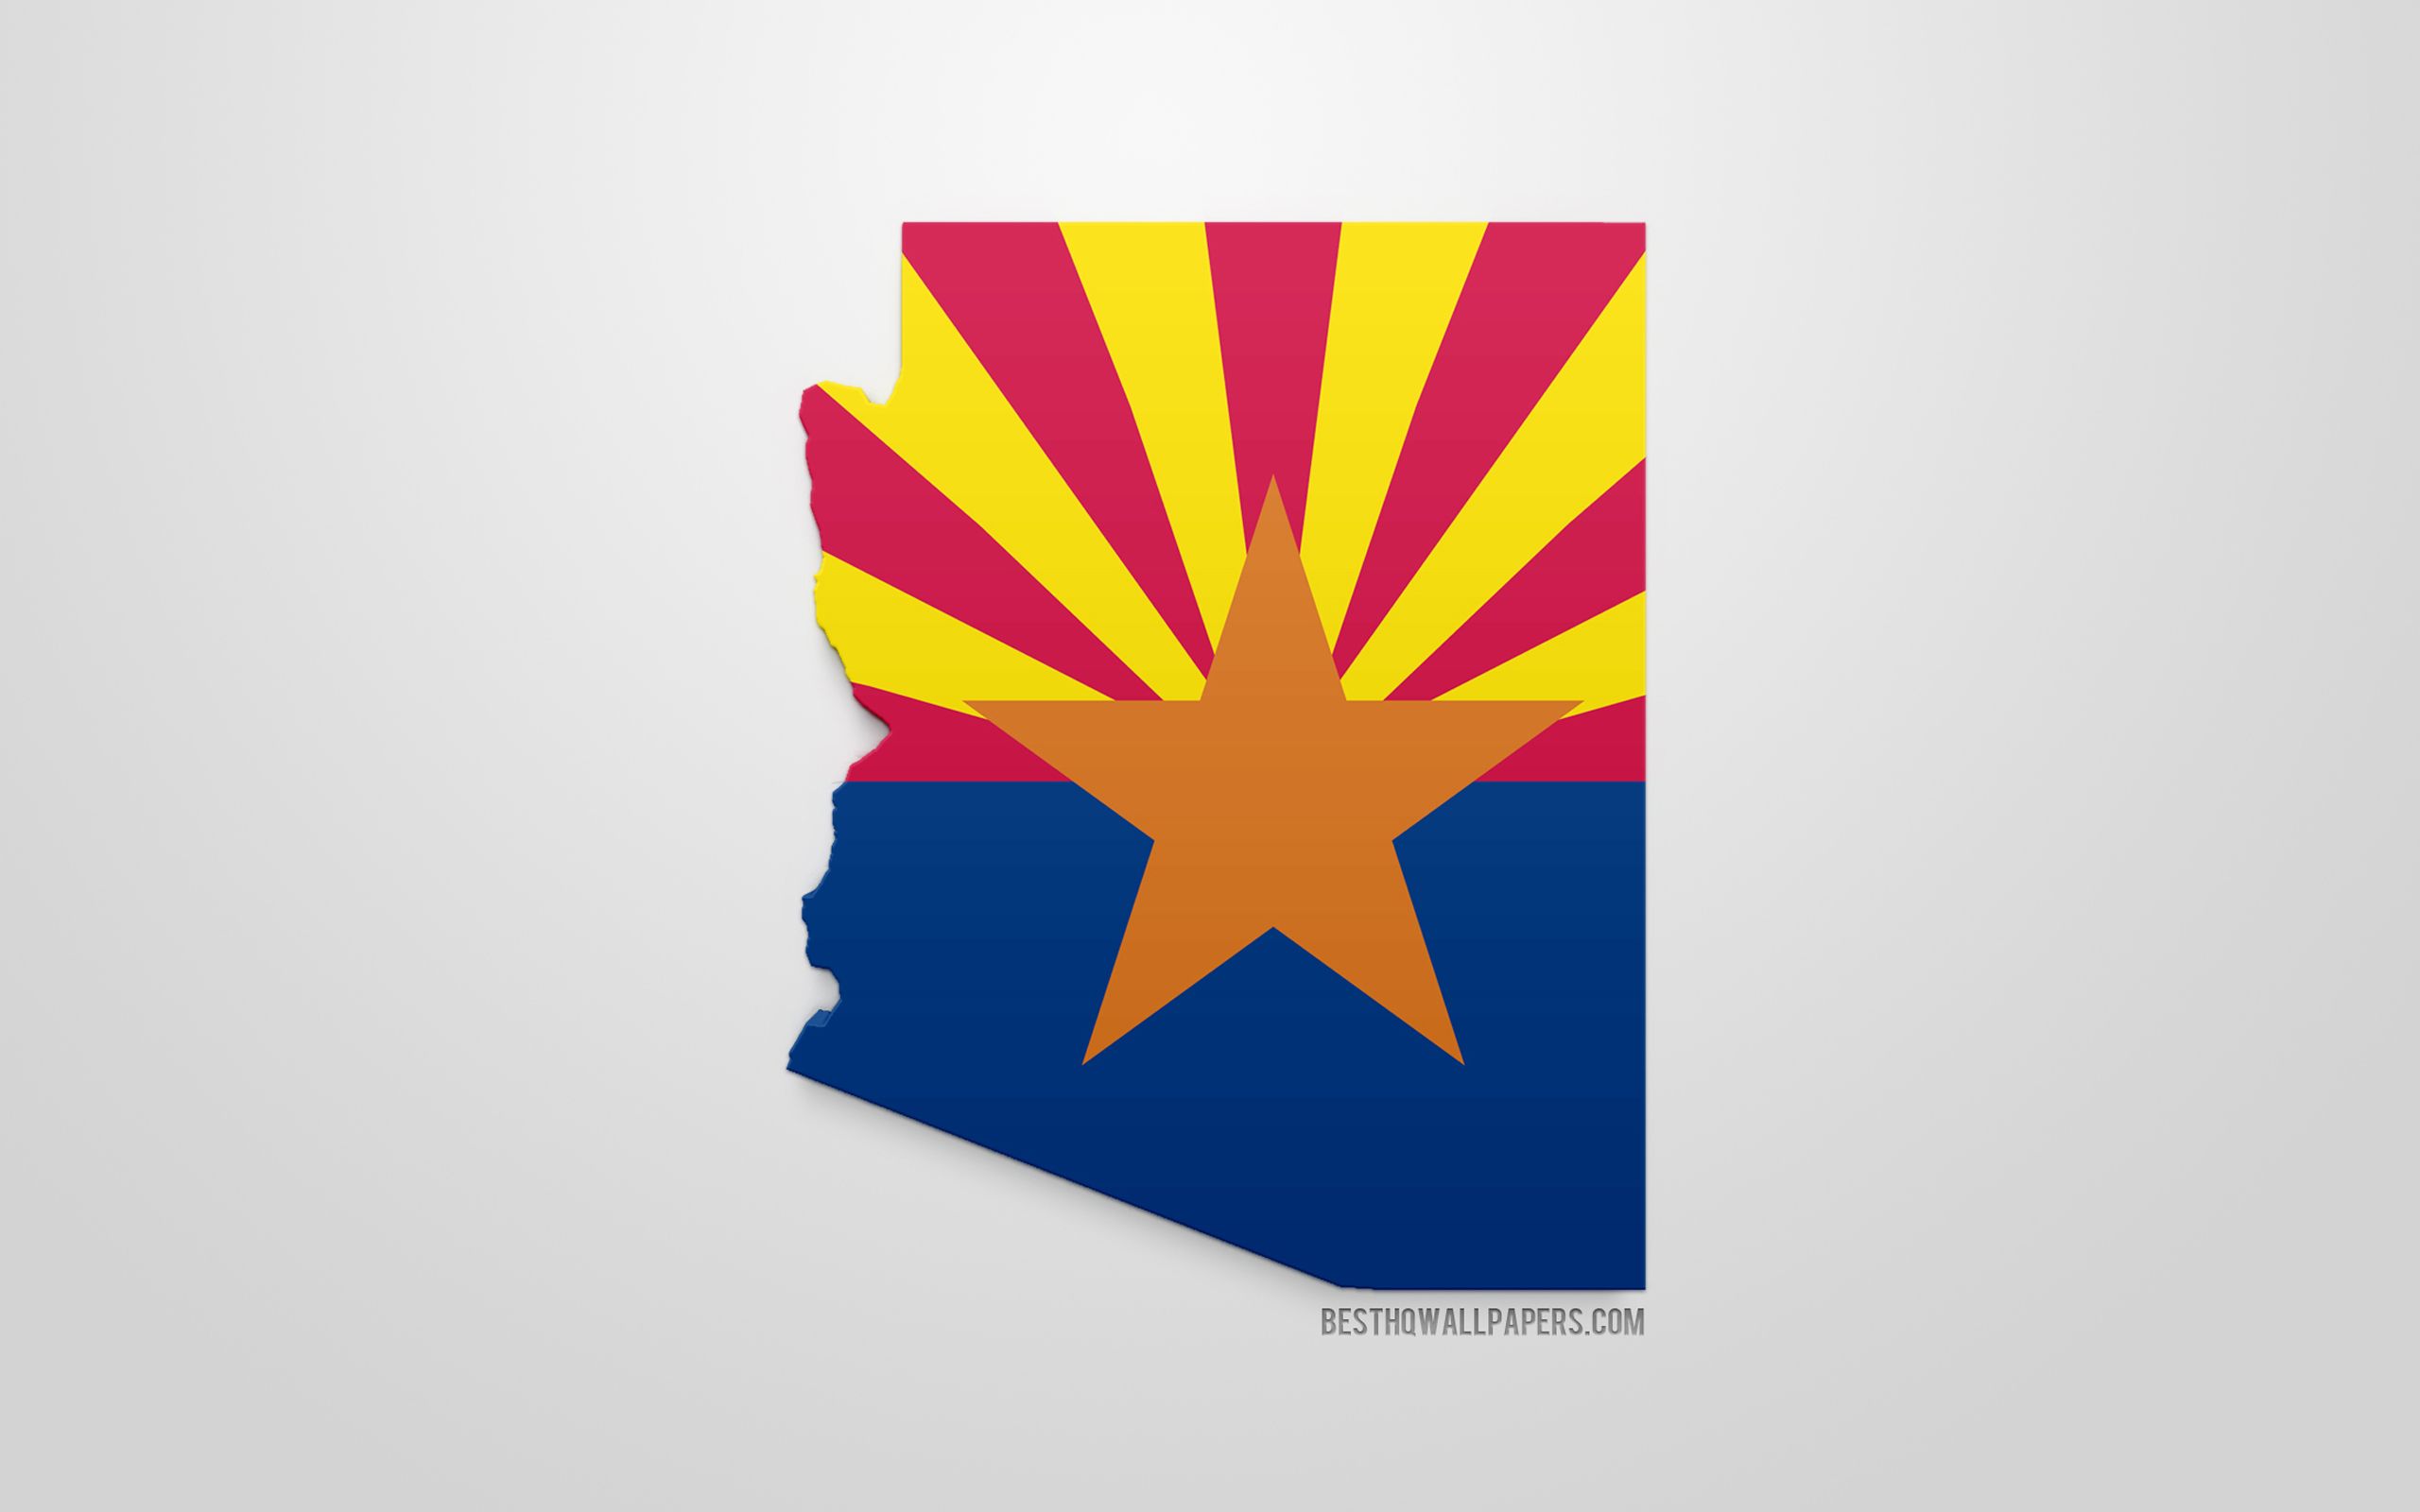 Download wallpaper 3D flag of Arizona, map silhouette of Arizona, US state, 3D art, Arizona 3D flag, USA, North America, Arizona, geography, Arizona 3D silhouette for desktop with resolution 2560x1600. High Quality